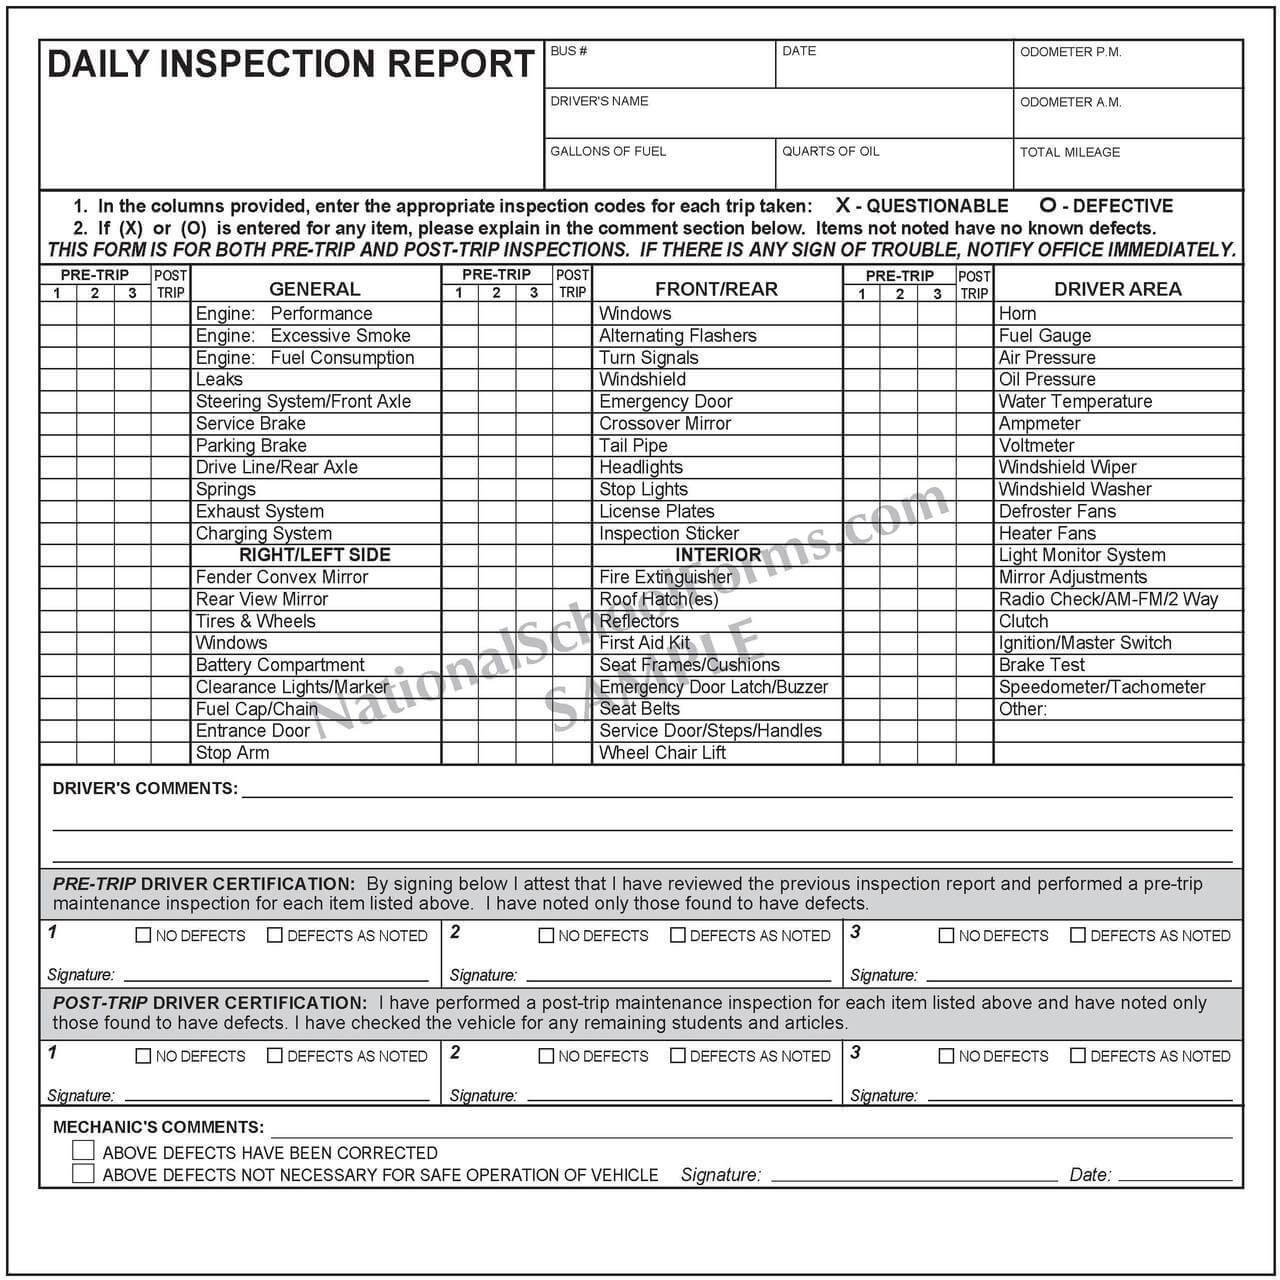 025 Driver Vehicle Inspection Report Template Ideas 217 Intended For Daily Inspection Report Template